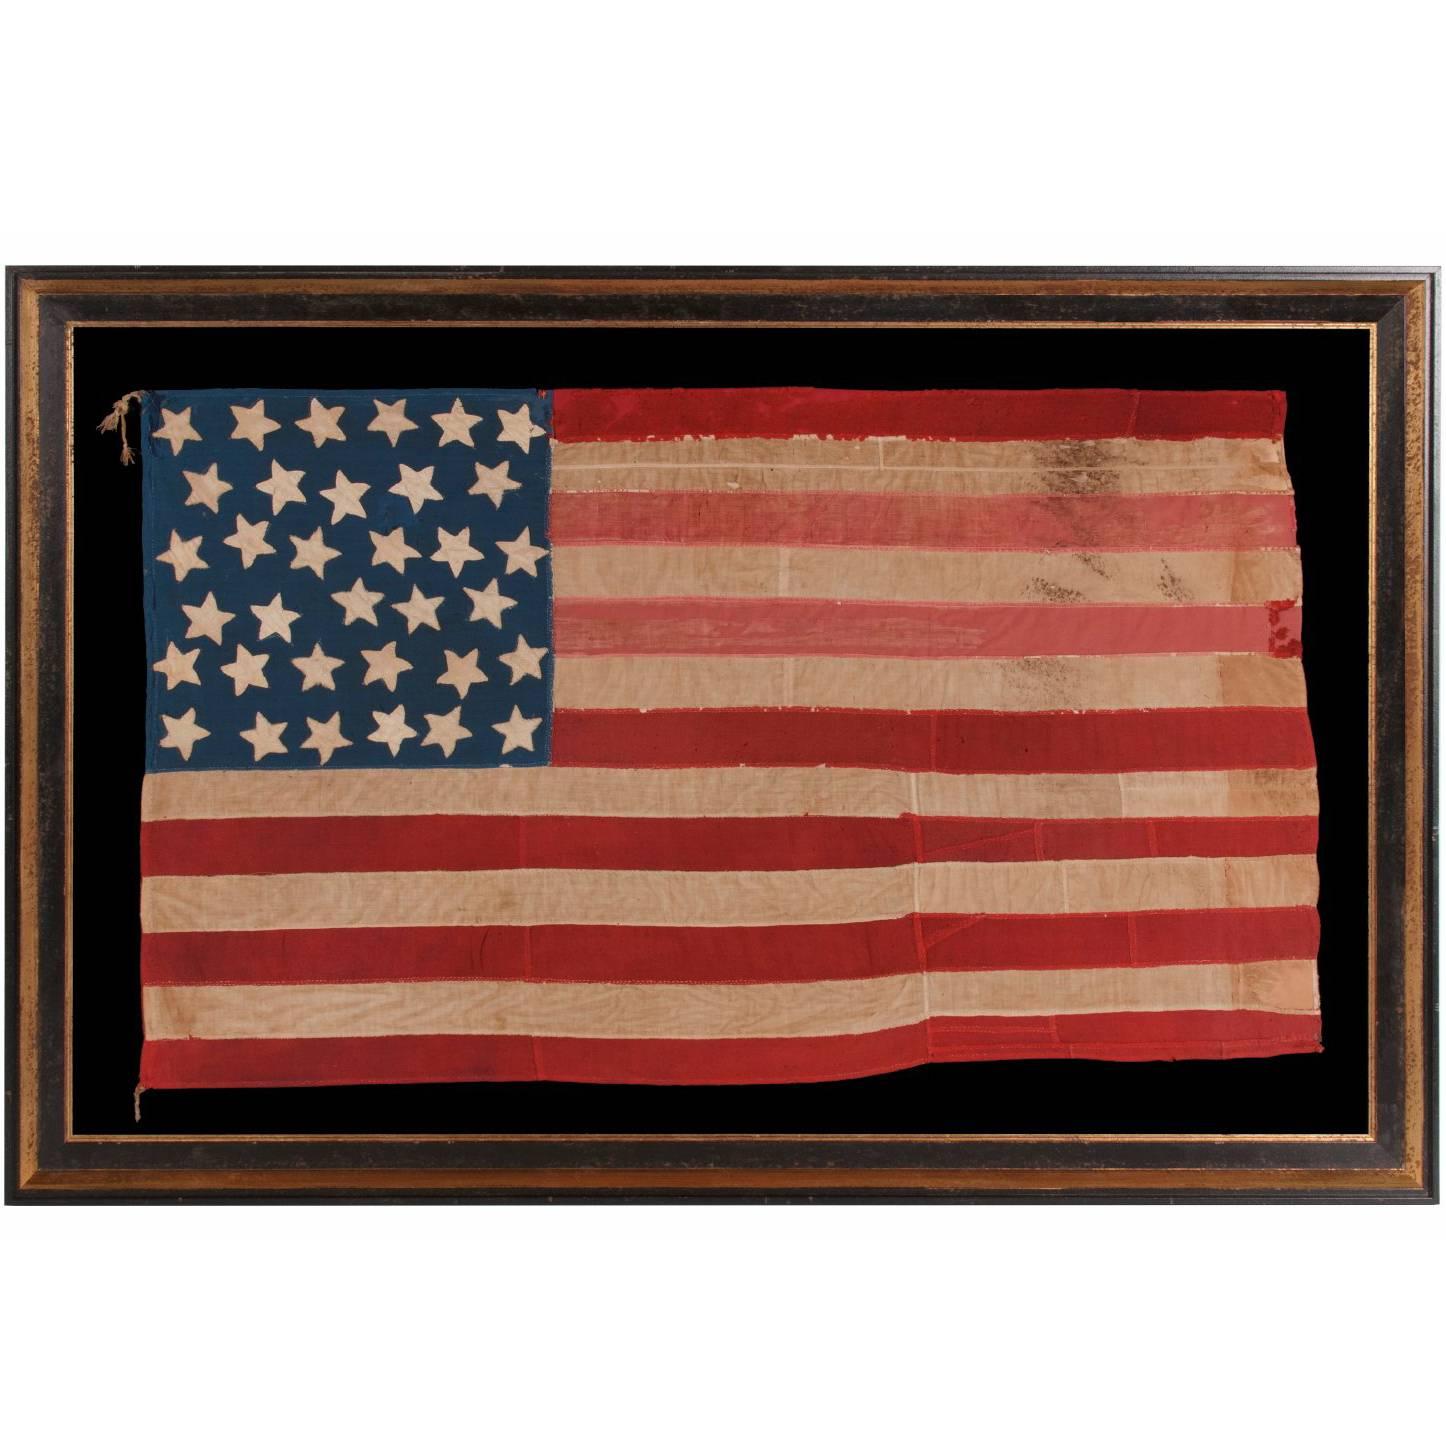 34 Star, Hand-Sewn, Homemade Antique American Flag of the Civil War Period